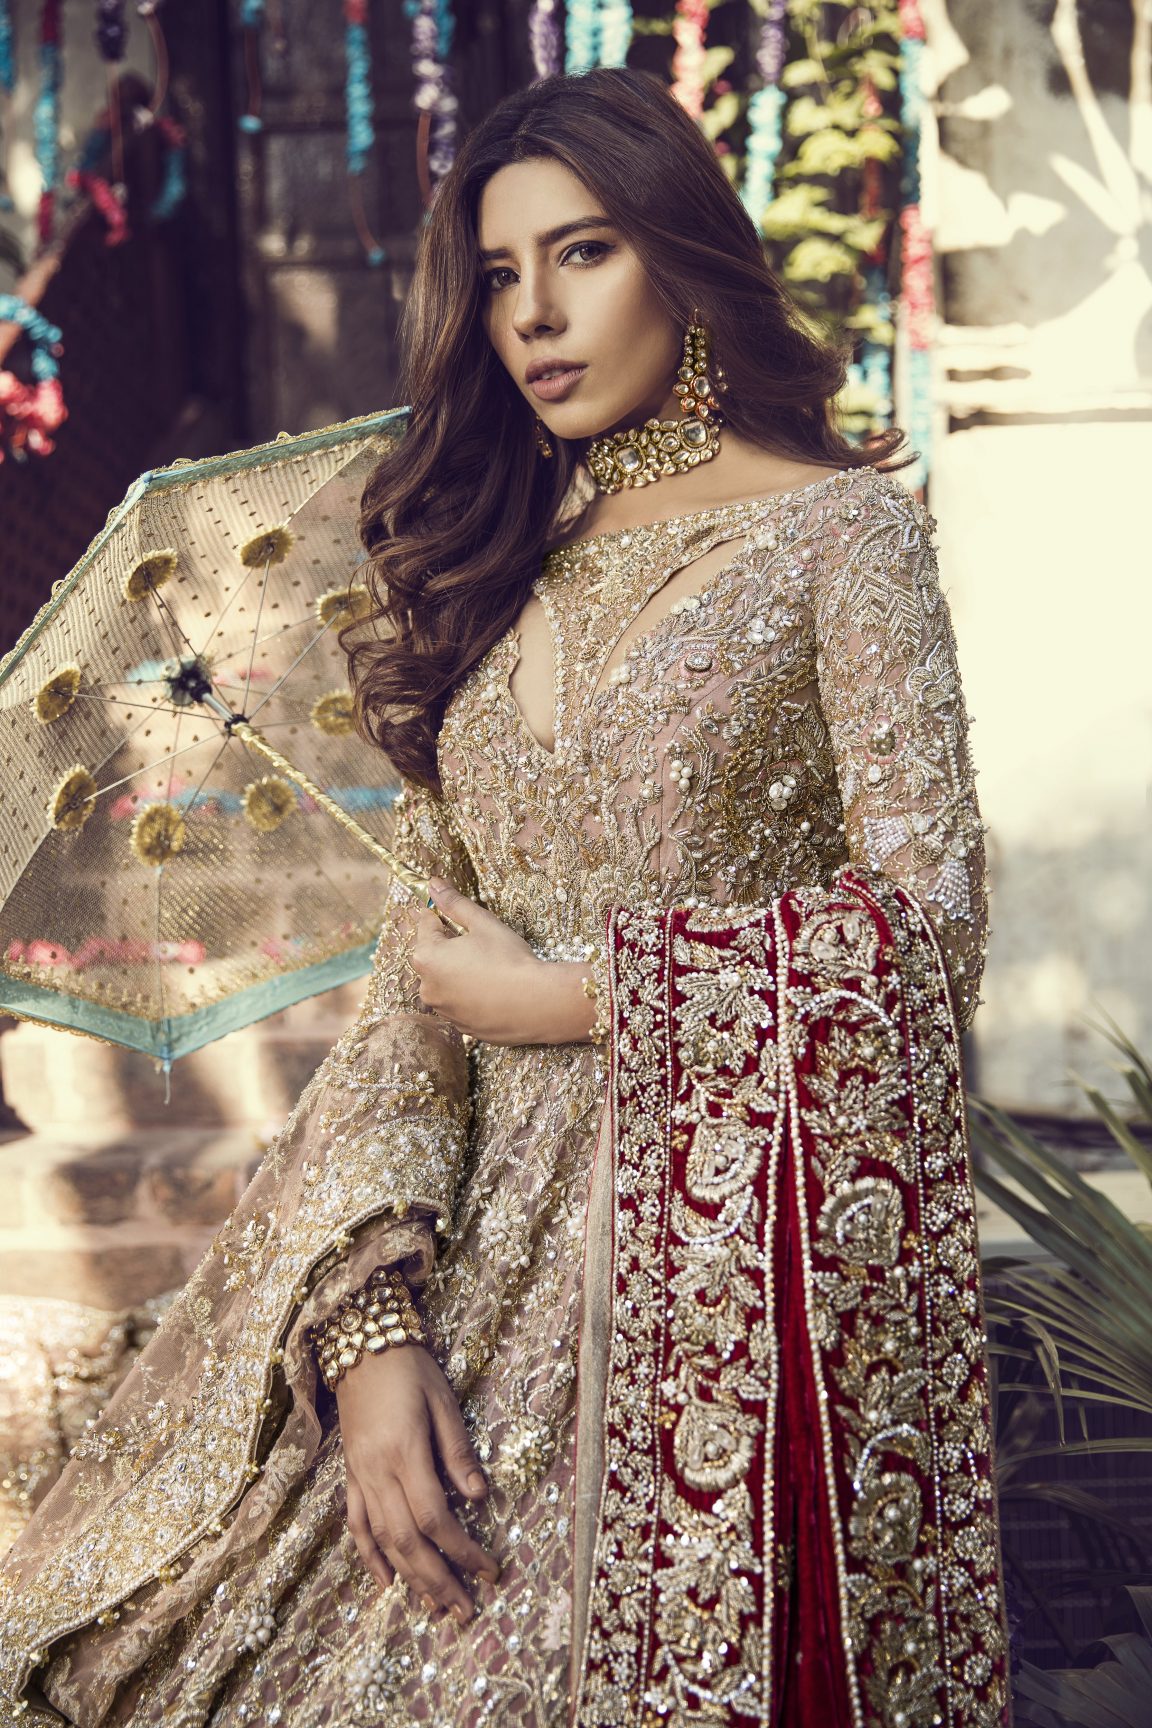 This Beautiful And Elegant Bridal Lehanga By Pakistani Fashion Designer Is Available At A Reasonable Price 1152x1728 